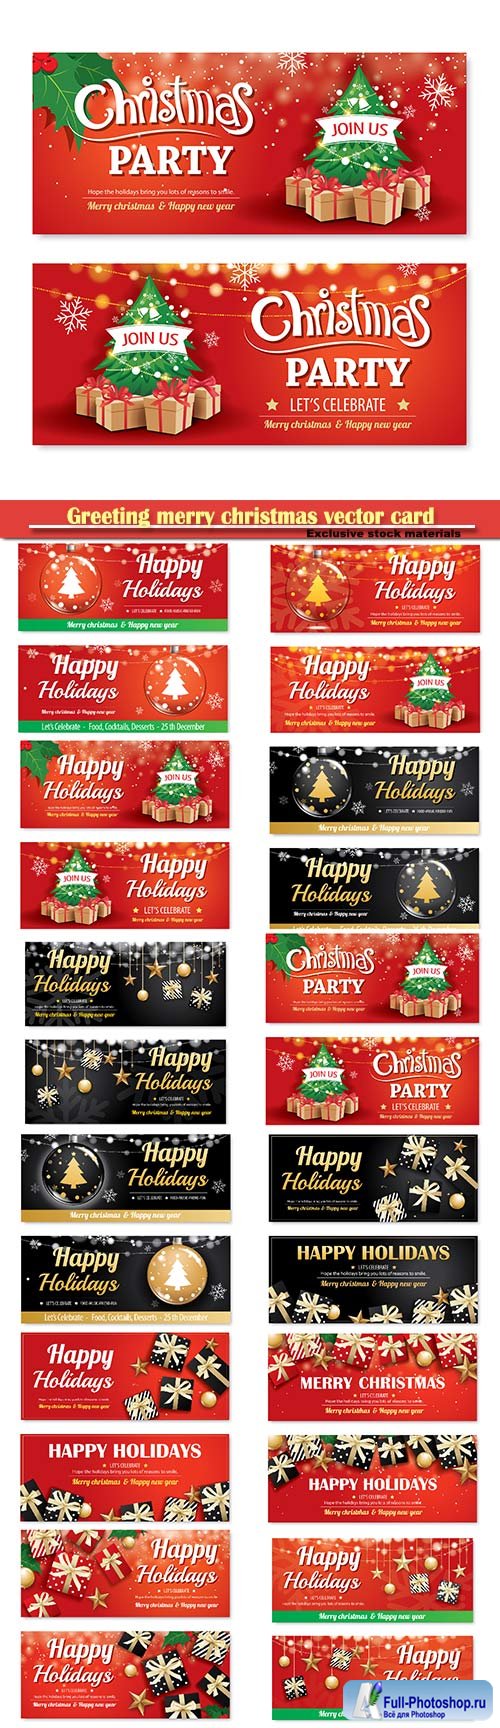 Greeting merry christmas vector card, party poster banner design template, happy holiday and new year